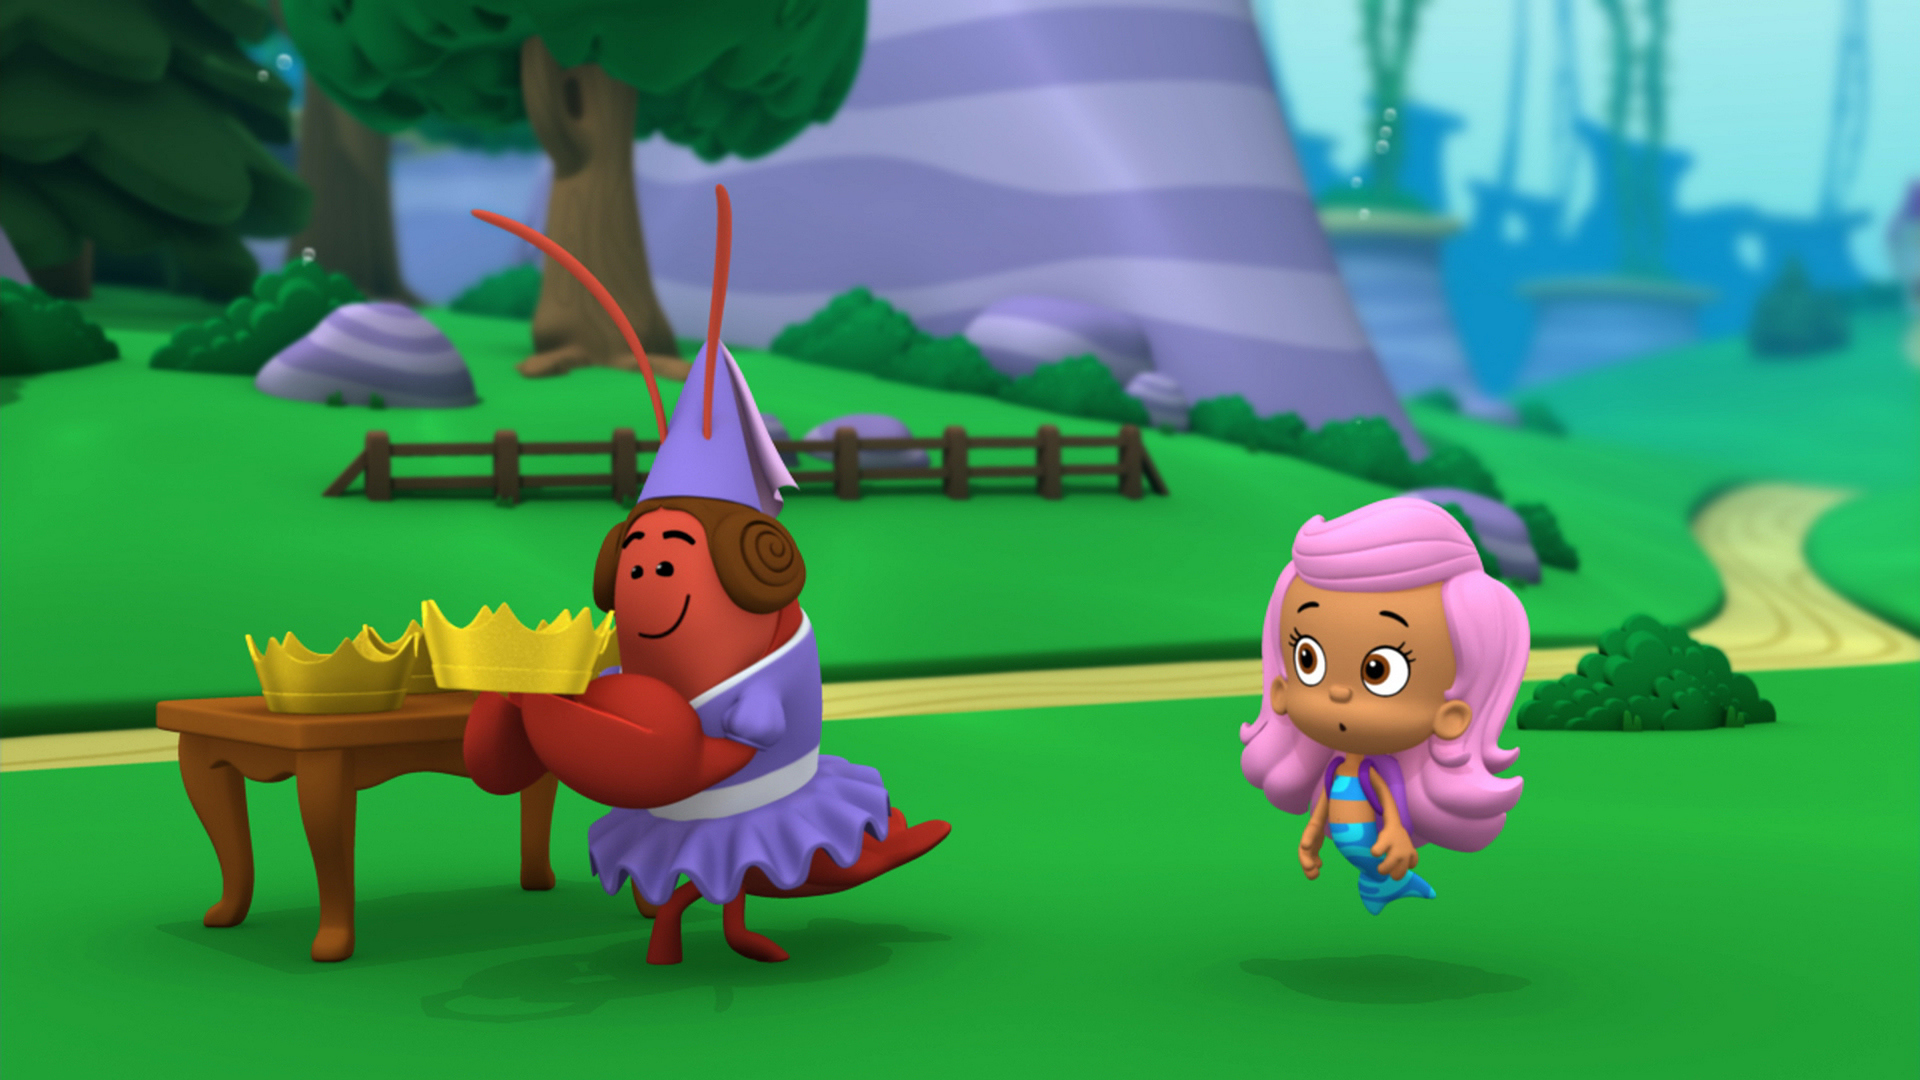 watch-bubble-guppies-season-4-episode-1-the-glitter-games-full-show-on-paramount-plus